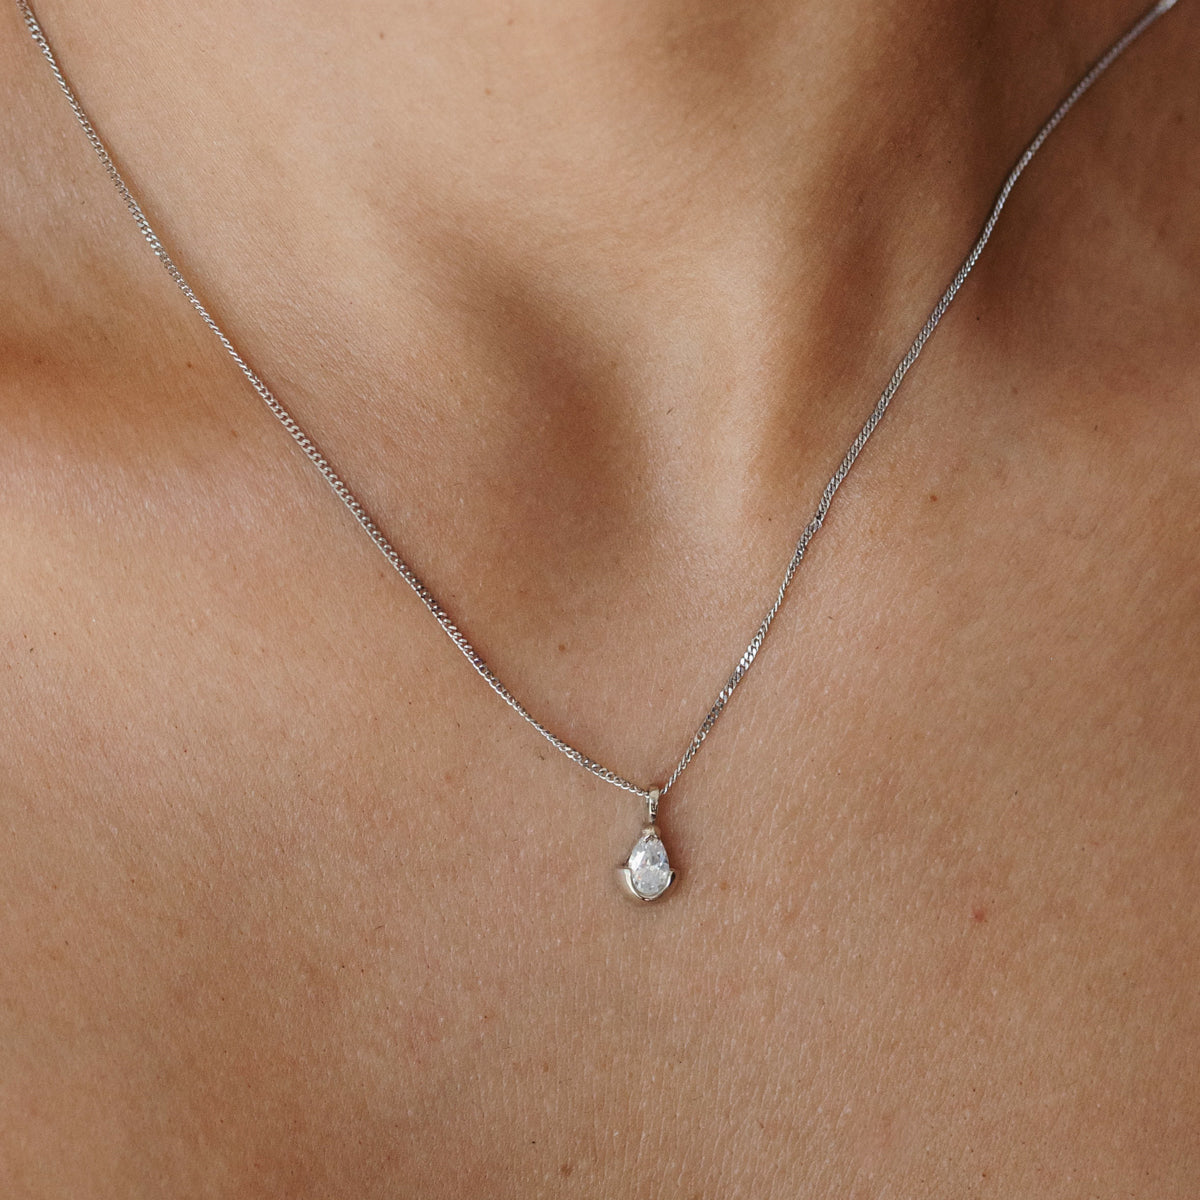 Archive — Floating Pear Necklace | 9ct White Gold